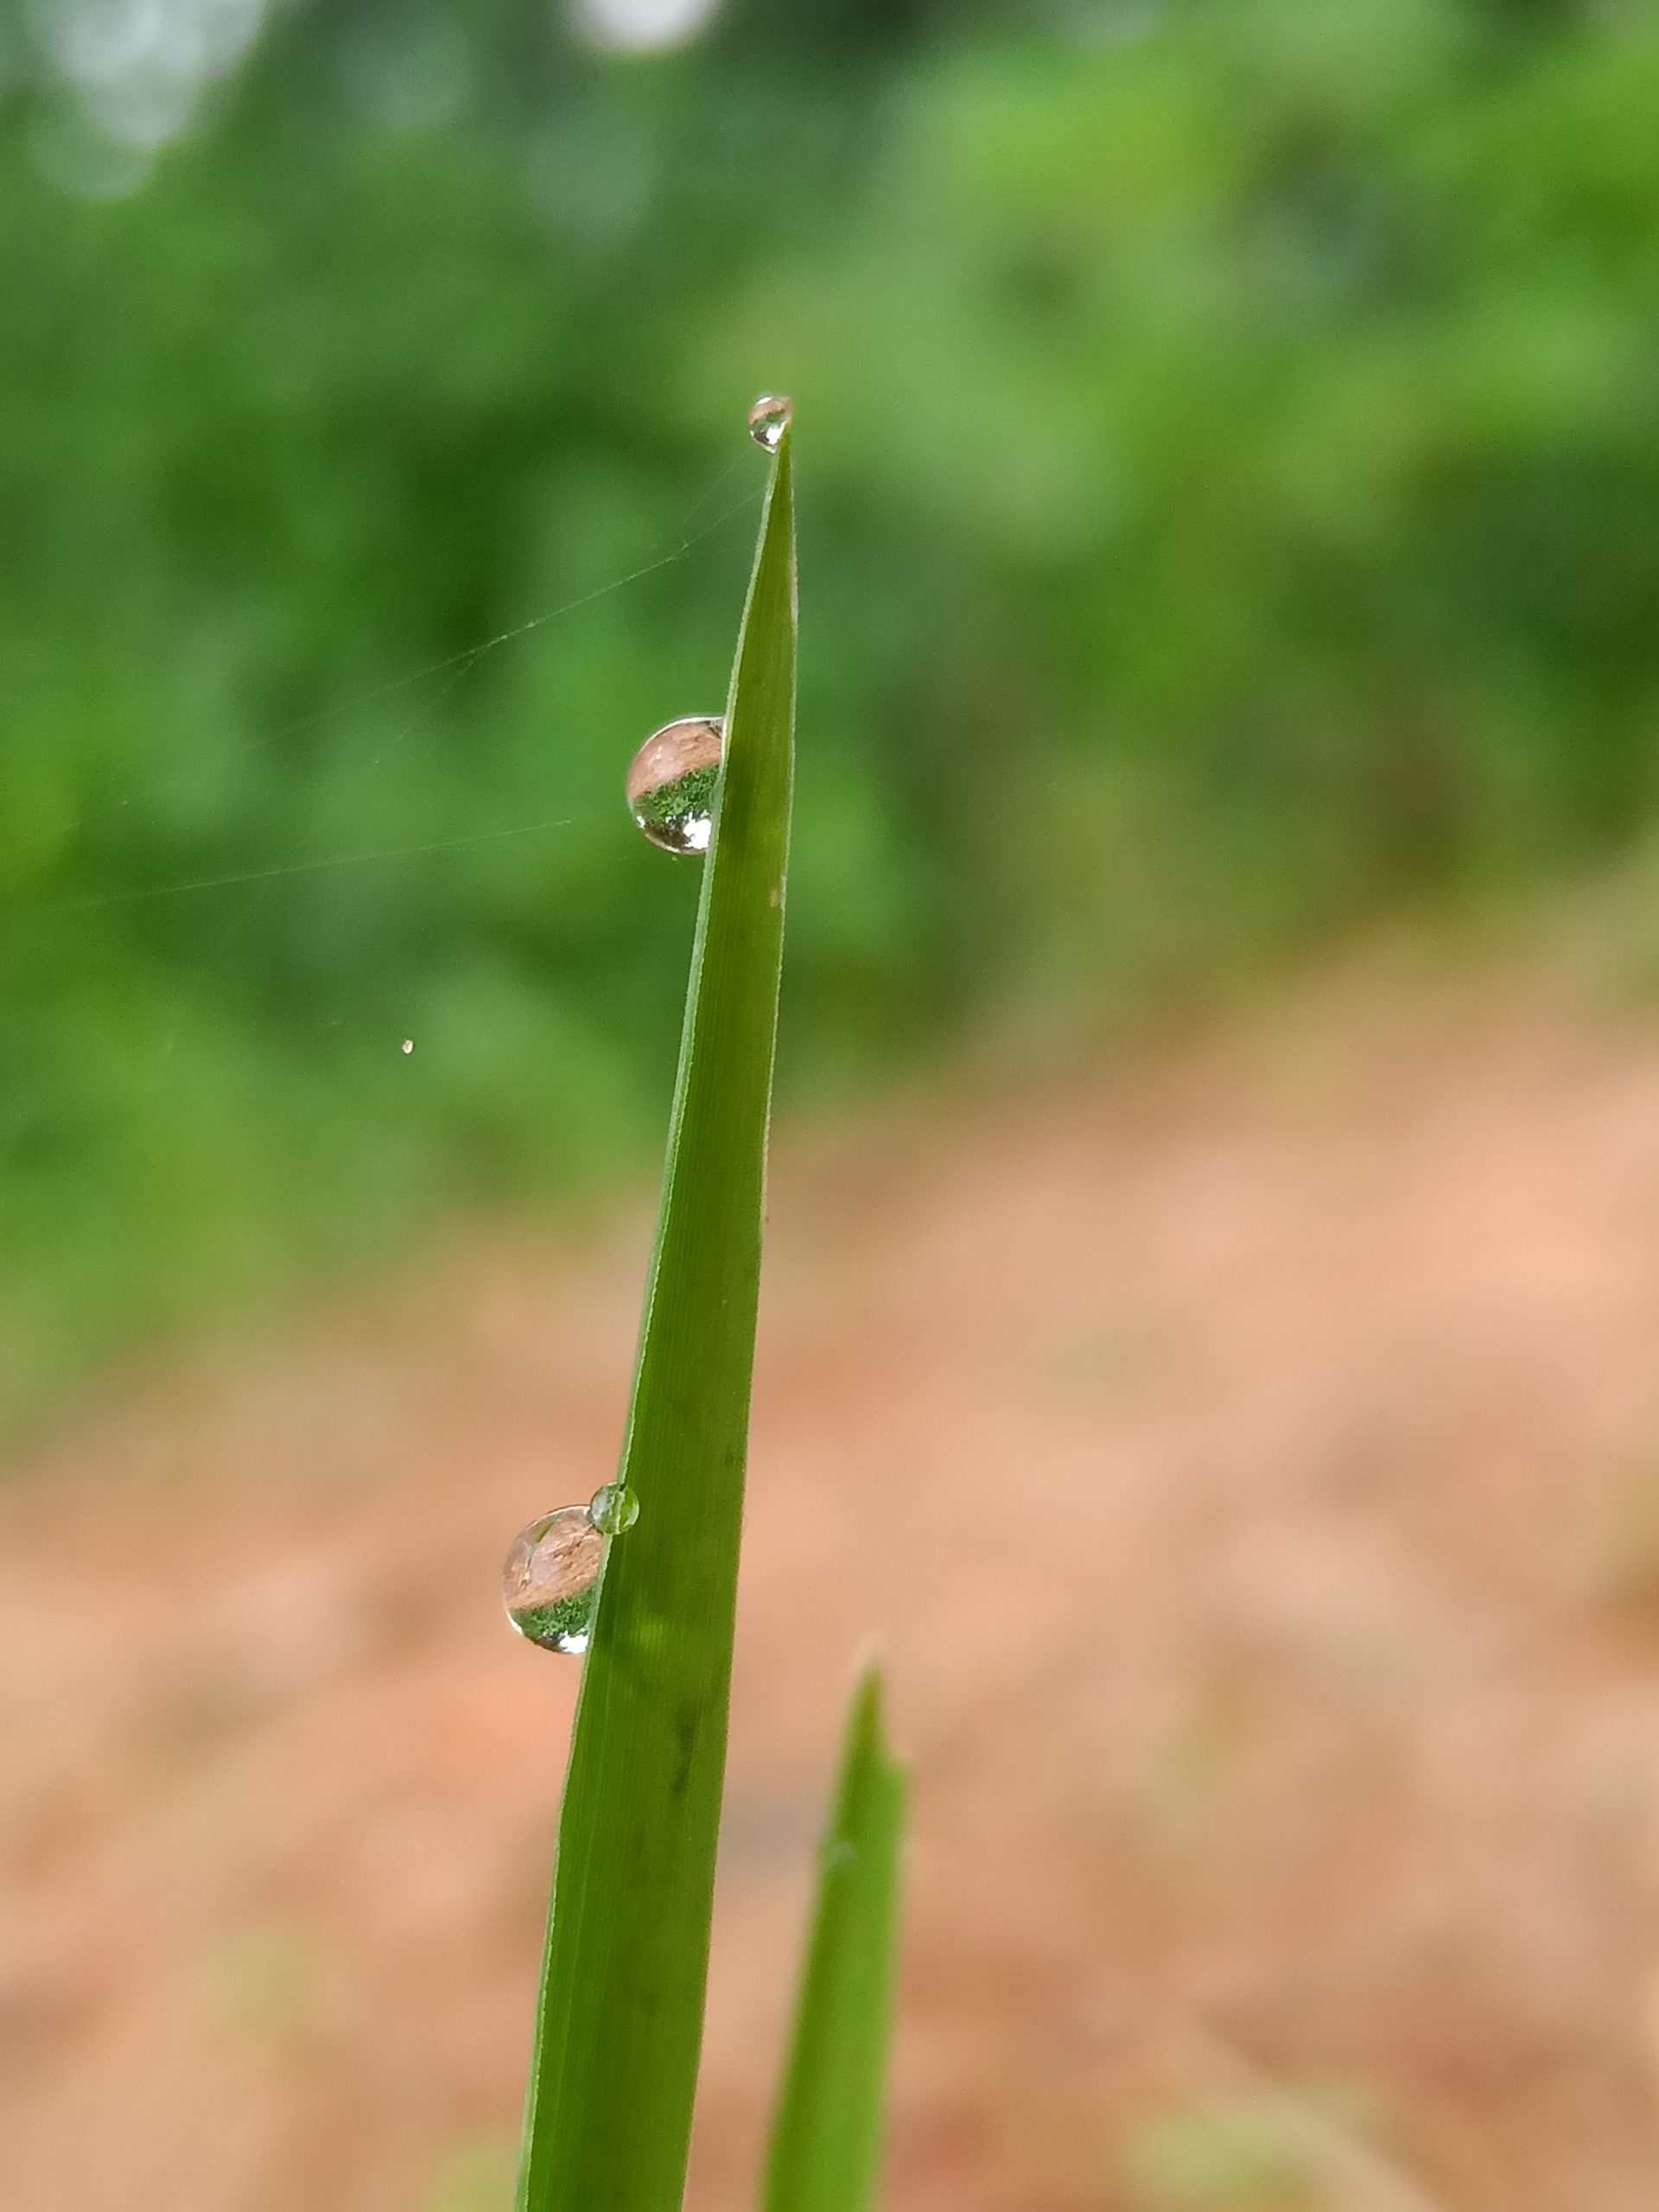 Droplets in Plant Twig on Focus